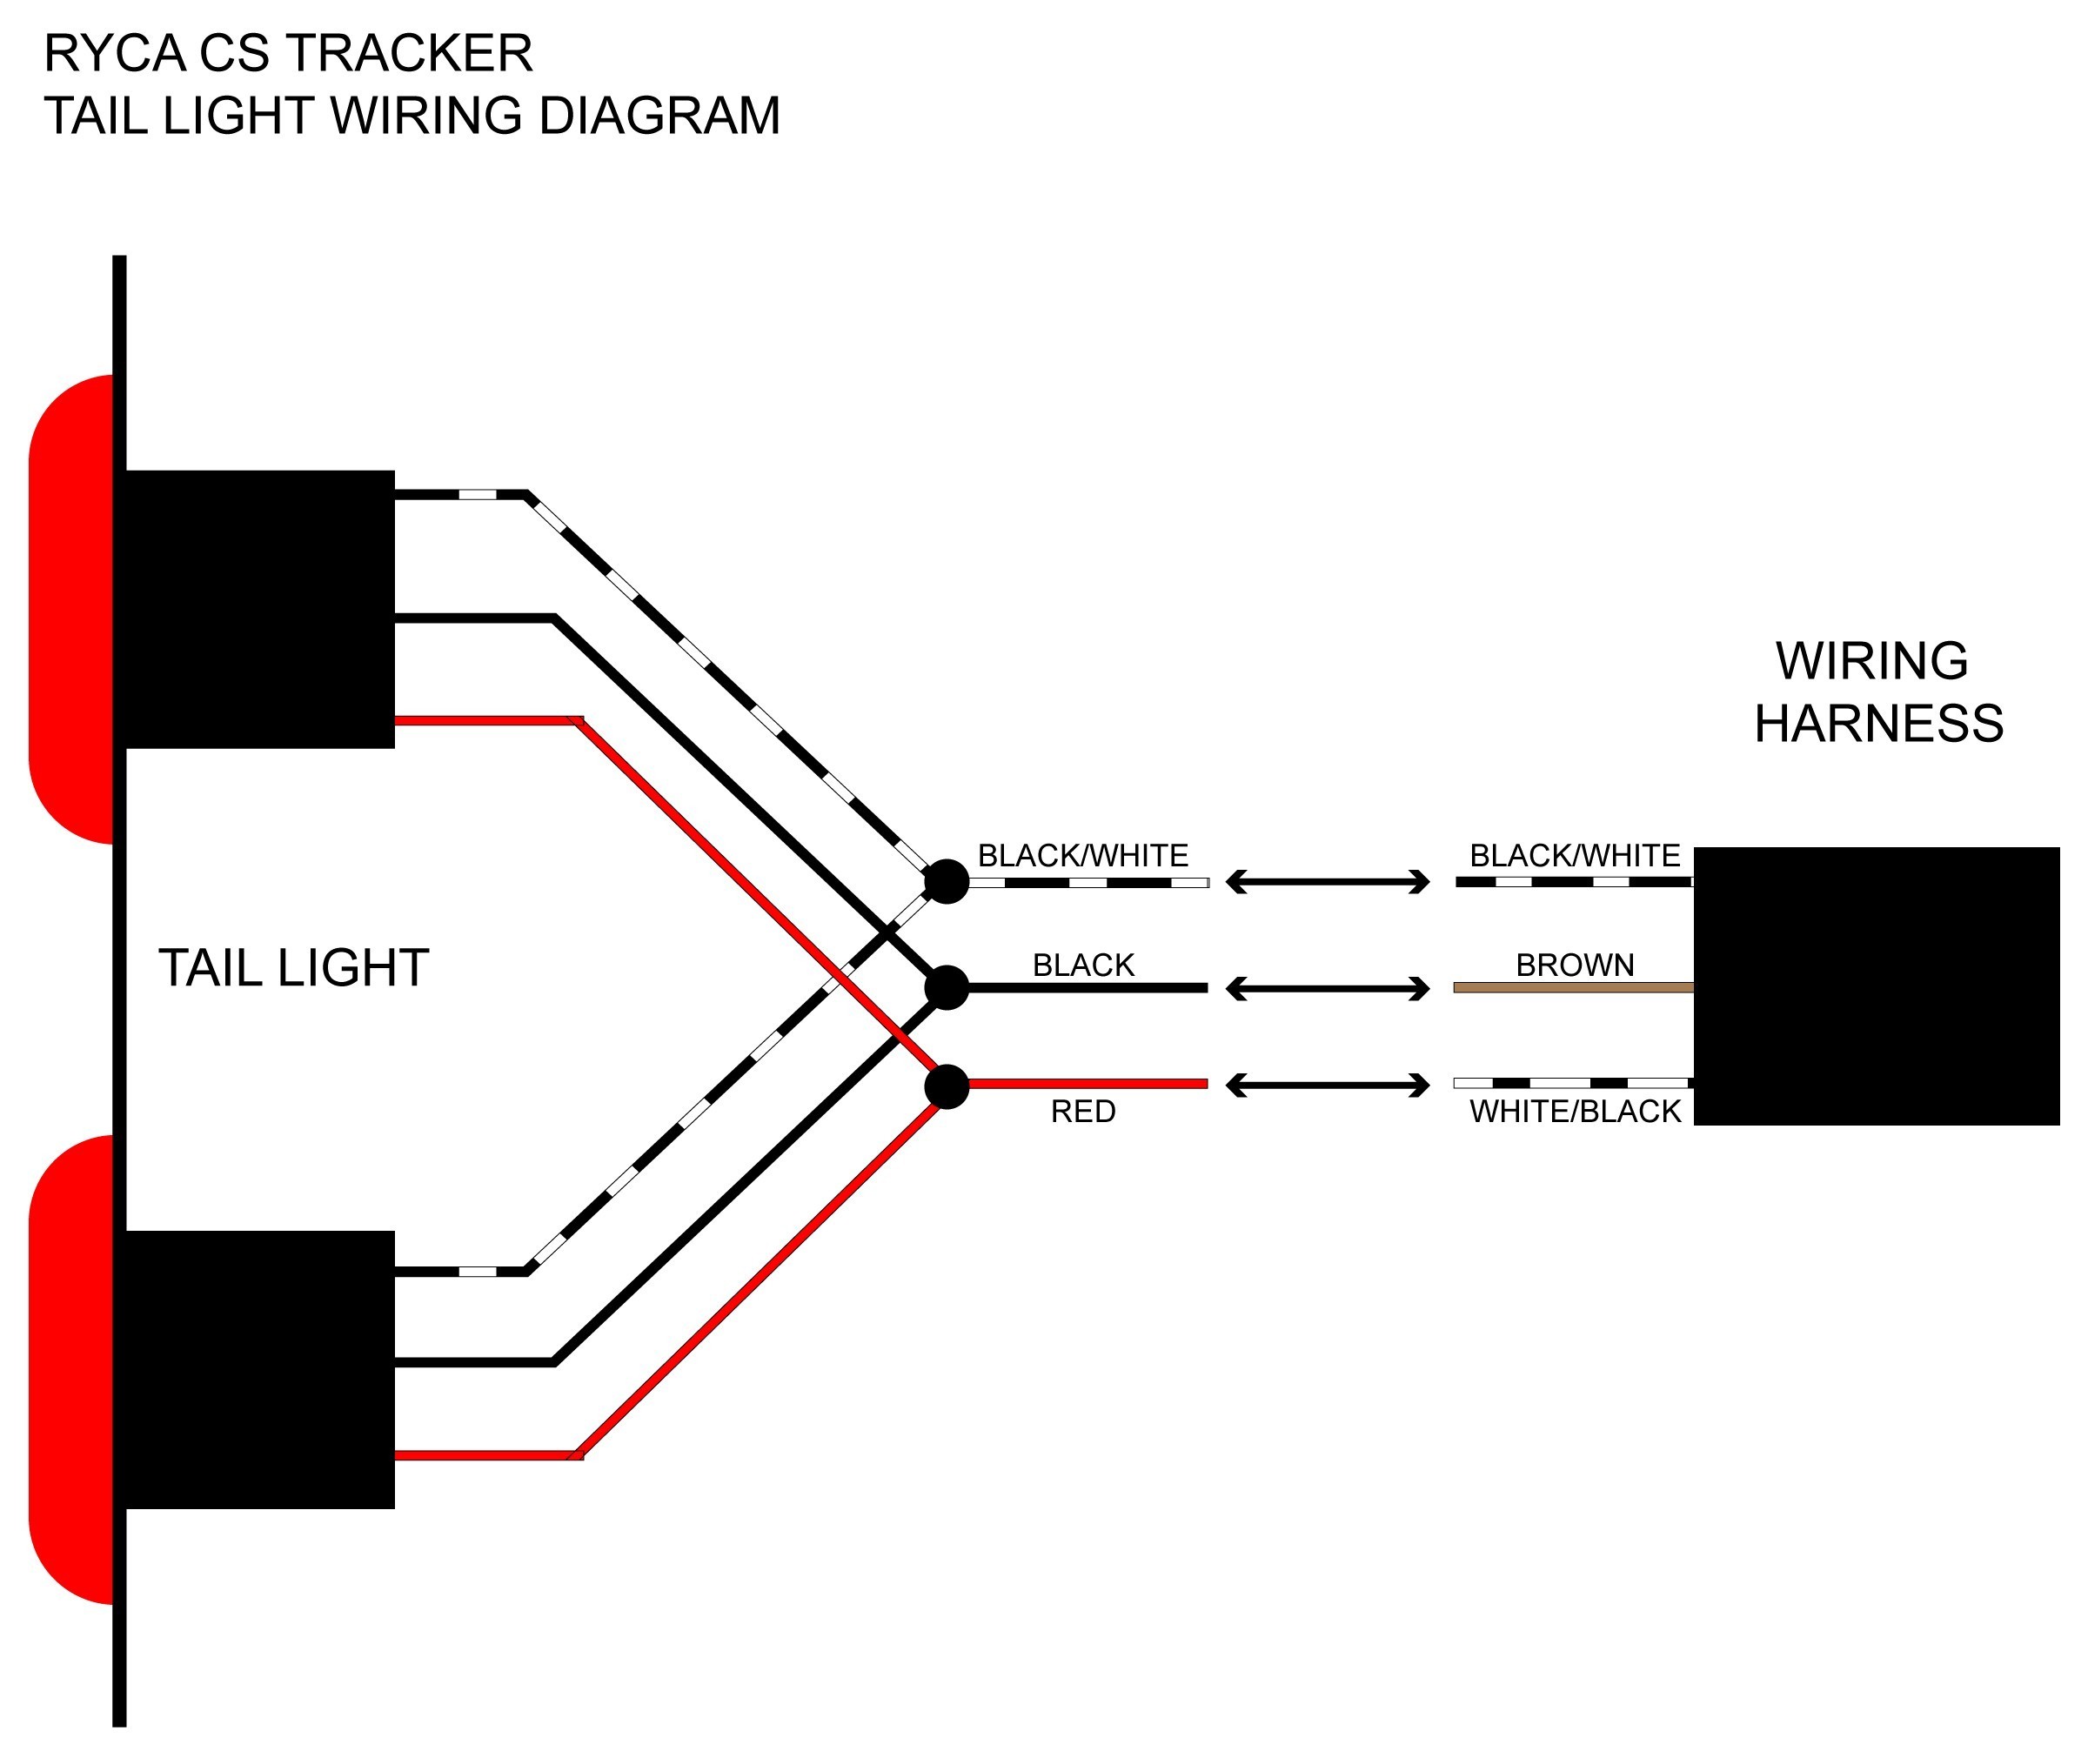 Freightliner Brake Light Wiring Diagram Led Taillights Wire Diagram Another Blog About Wiring Diagram • Of Freightliner Brake Light Wiring Diagram